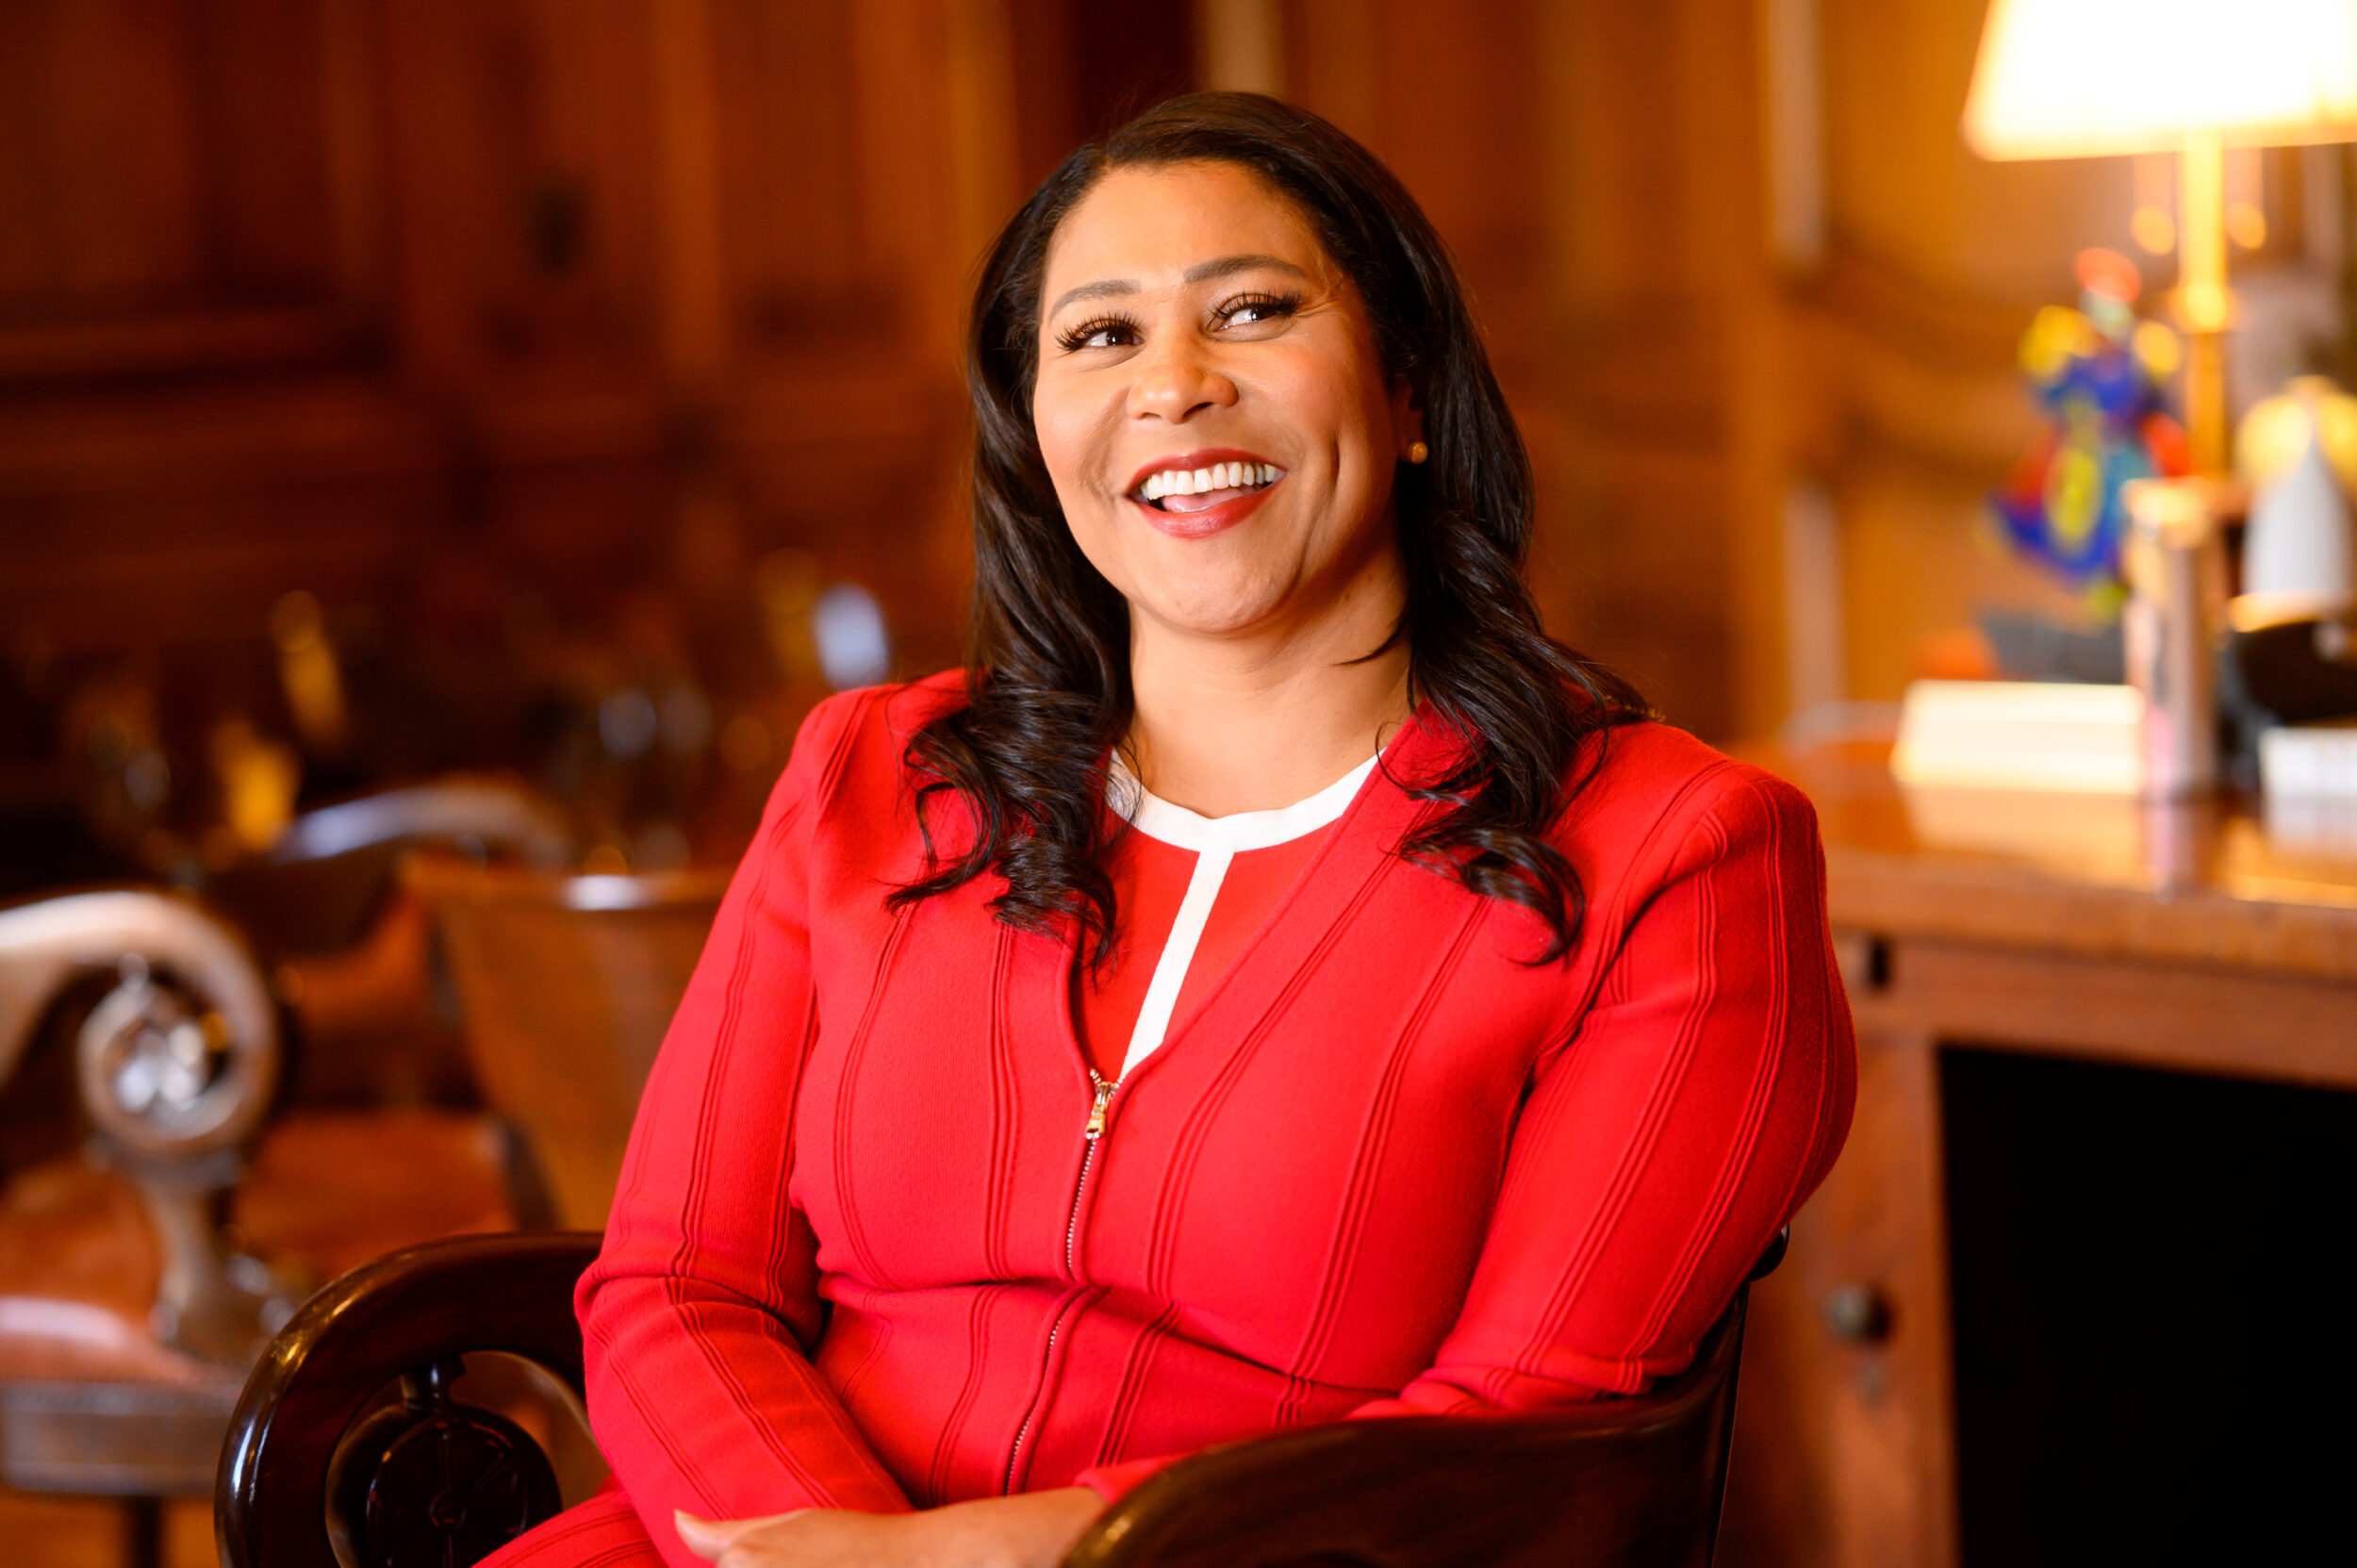 San Francisco Mayor London Breed smiles during an interview on Thursday, June 1, 2023, in San Francisco, Calif.